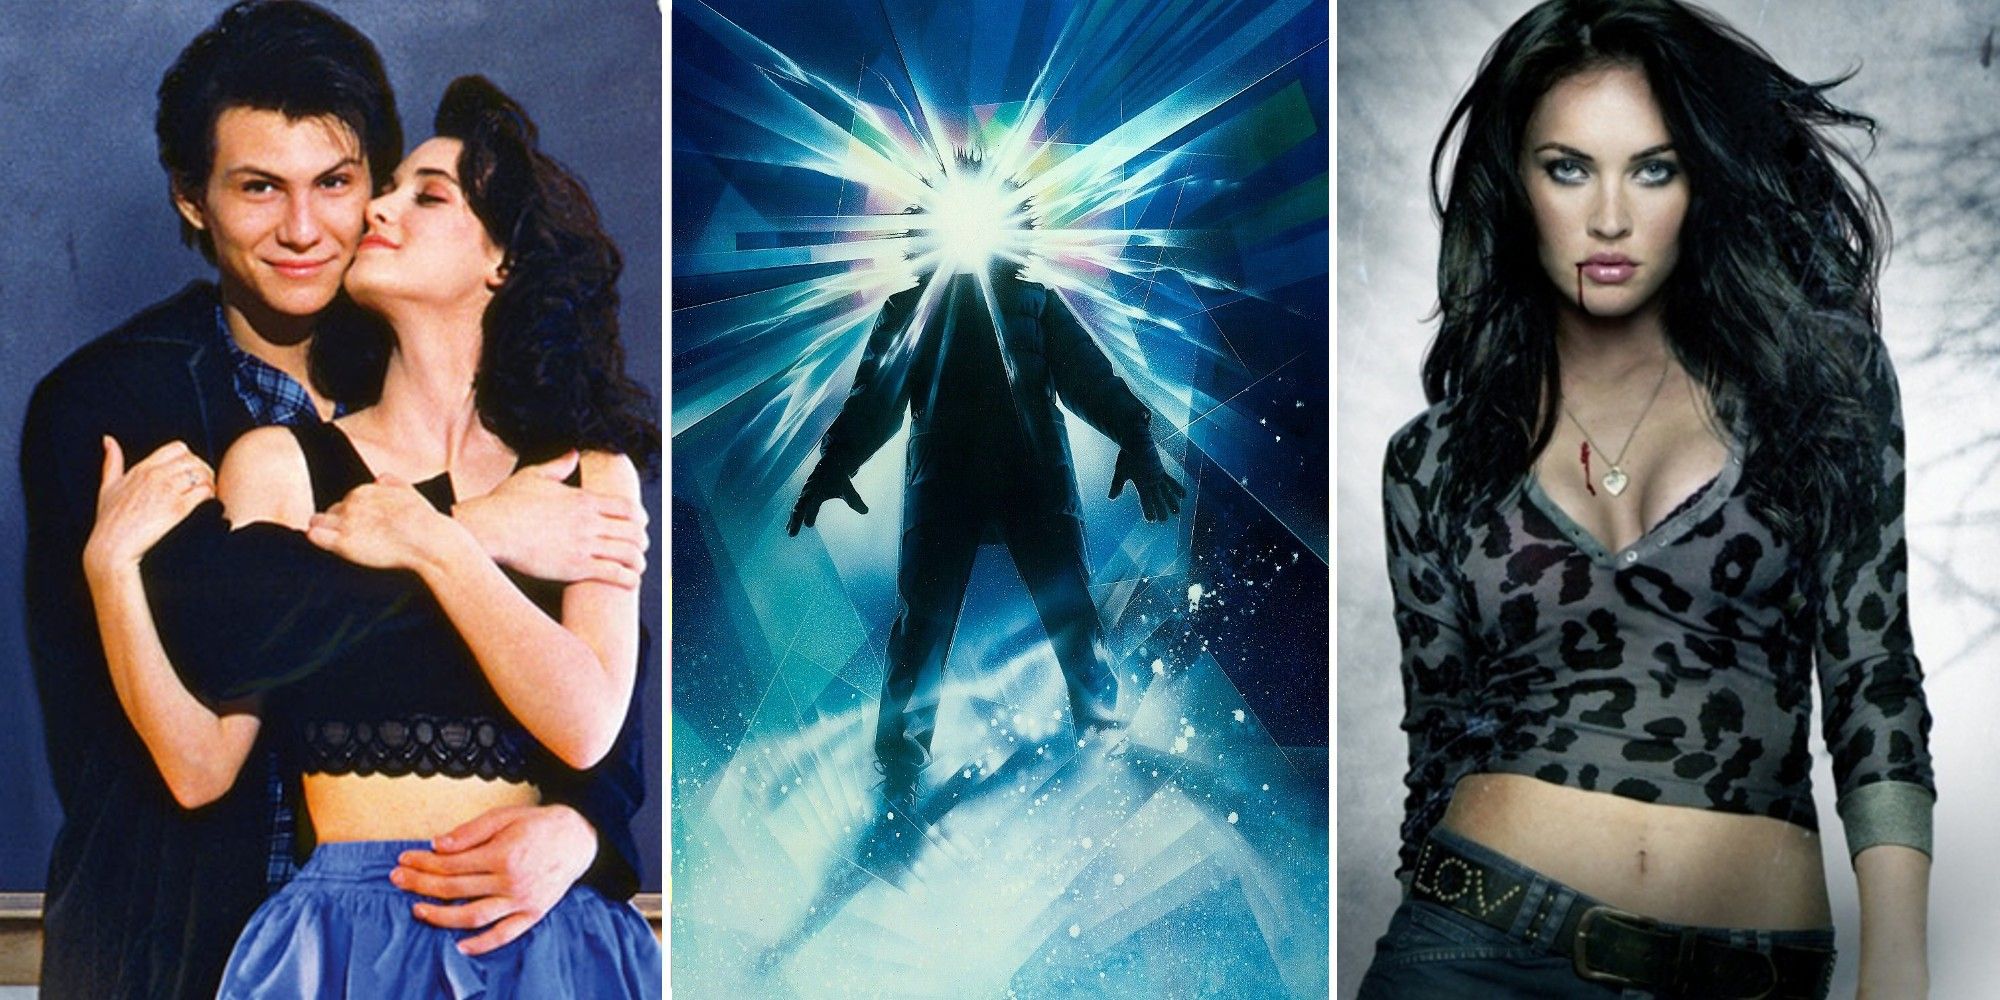 The posters for the movies Heathers, The Thing, and Jennifer's Body